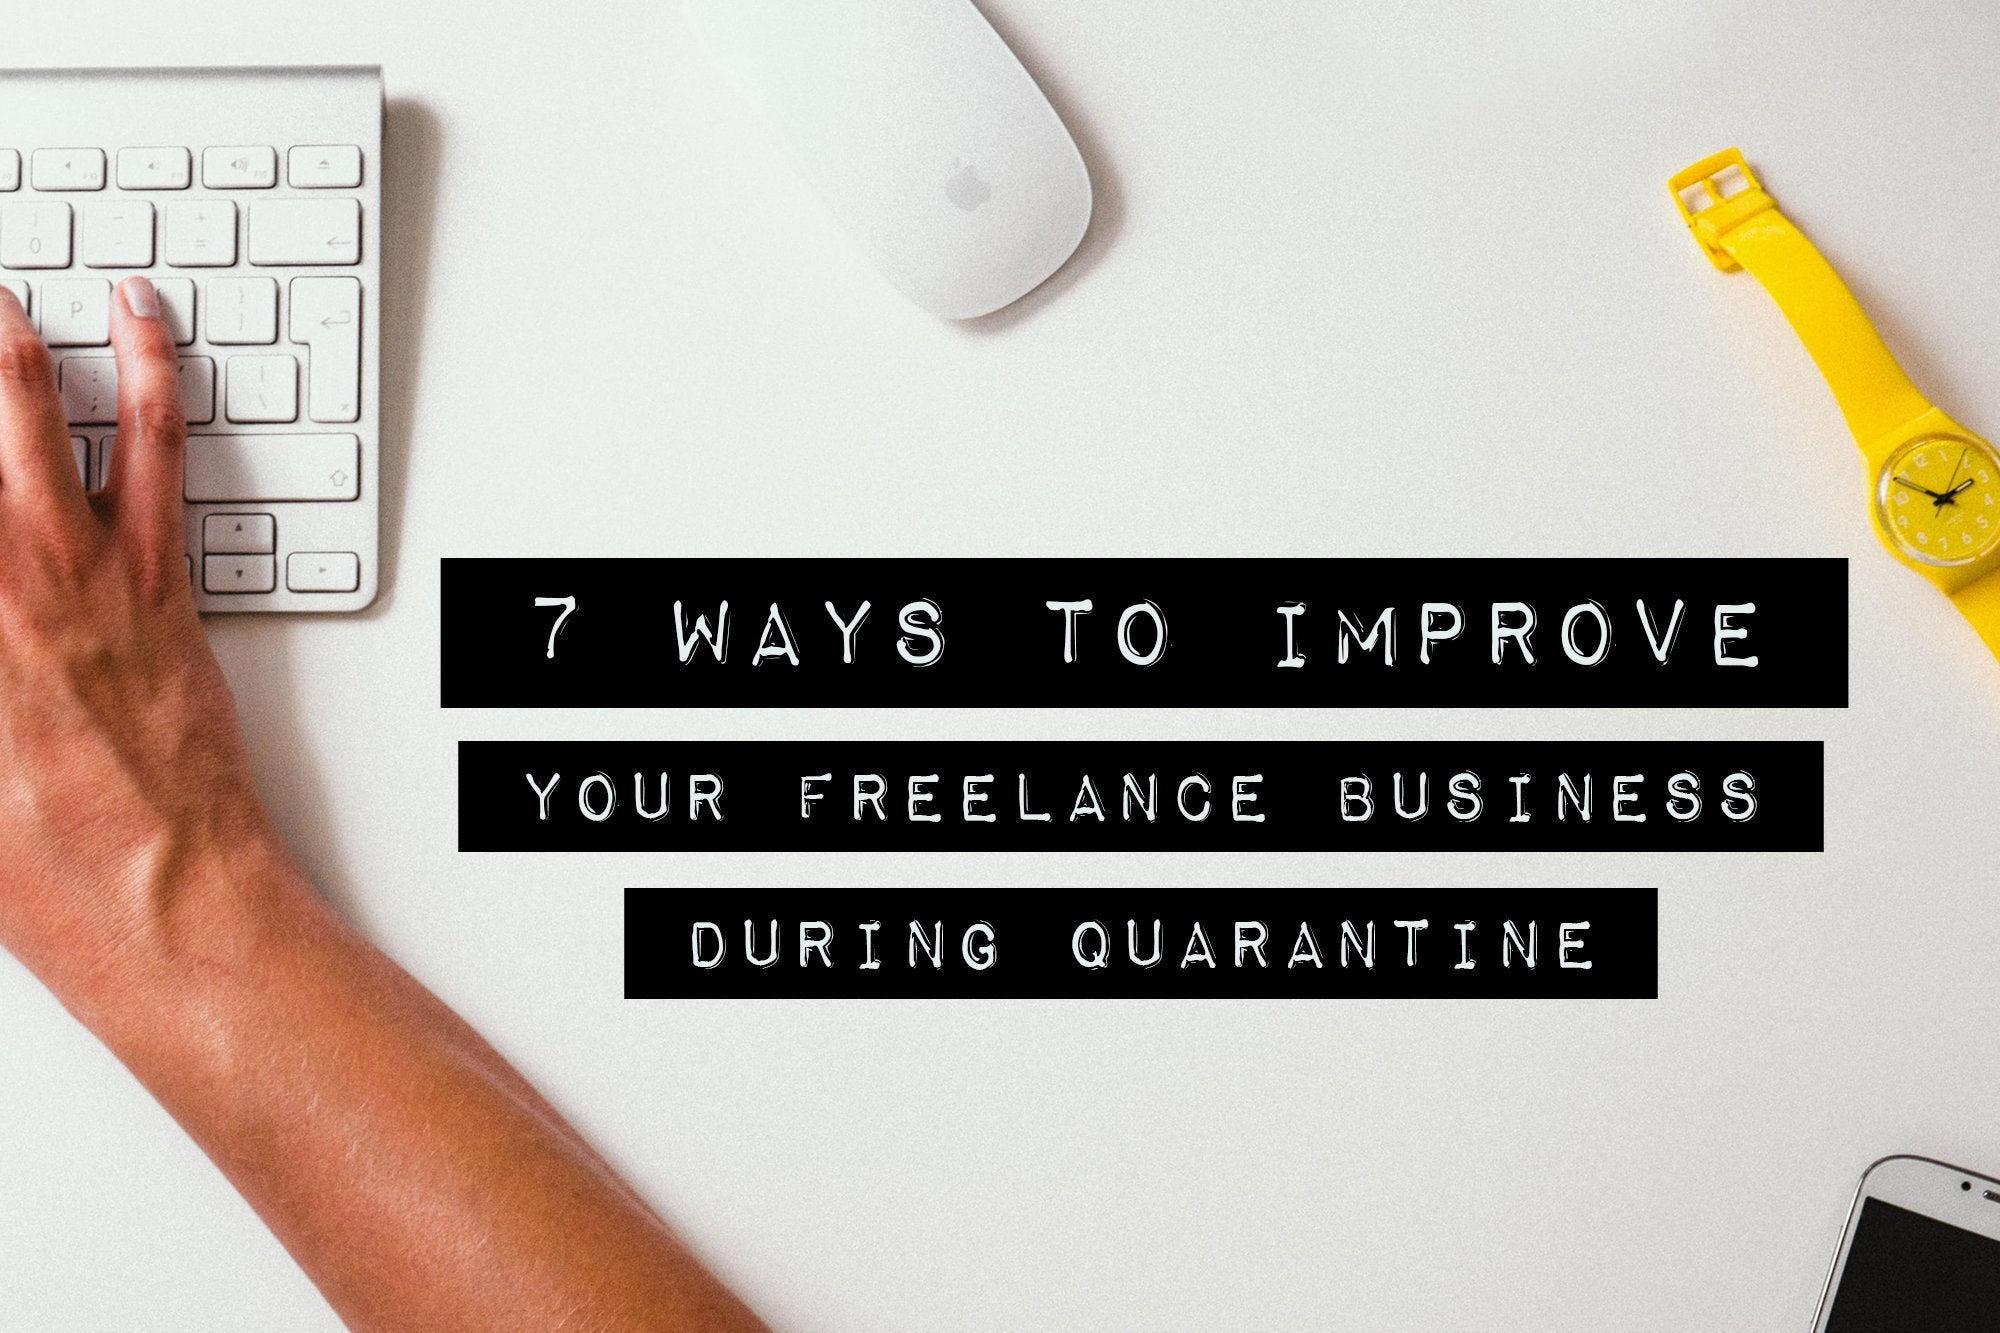 7 Ways to Improve Your Freelance Business During Quarantine | The Dirt - Super Natural Personal Care